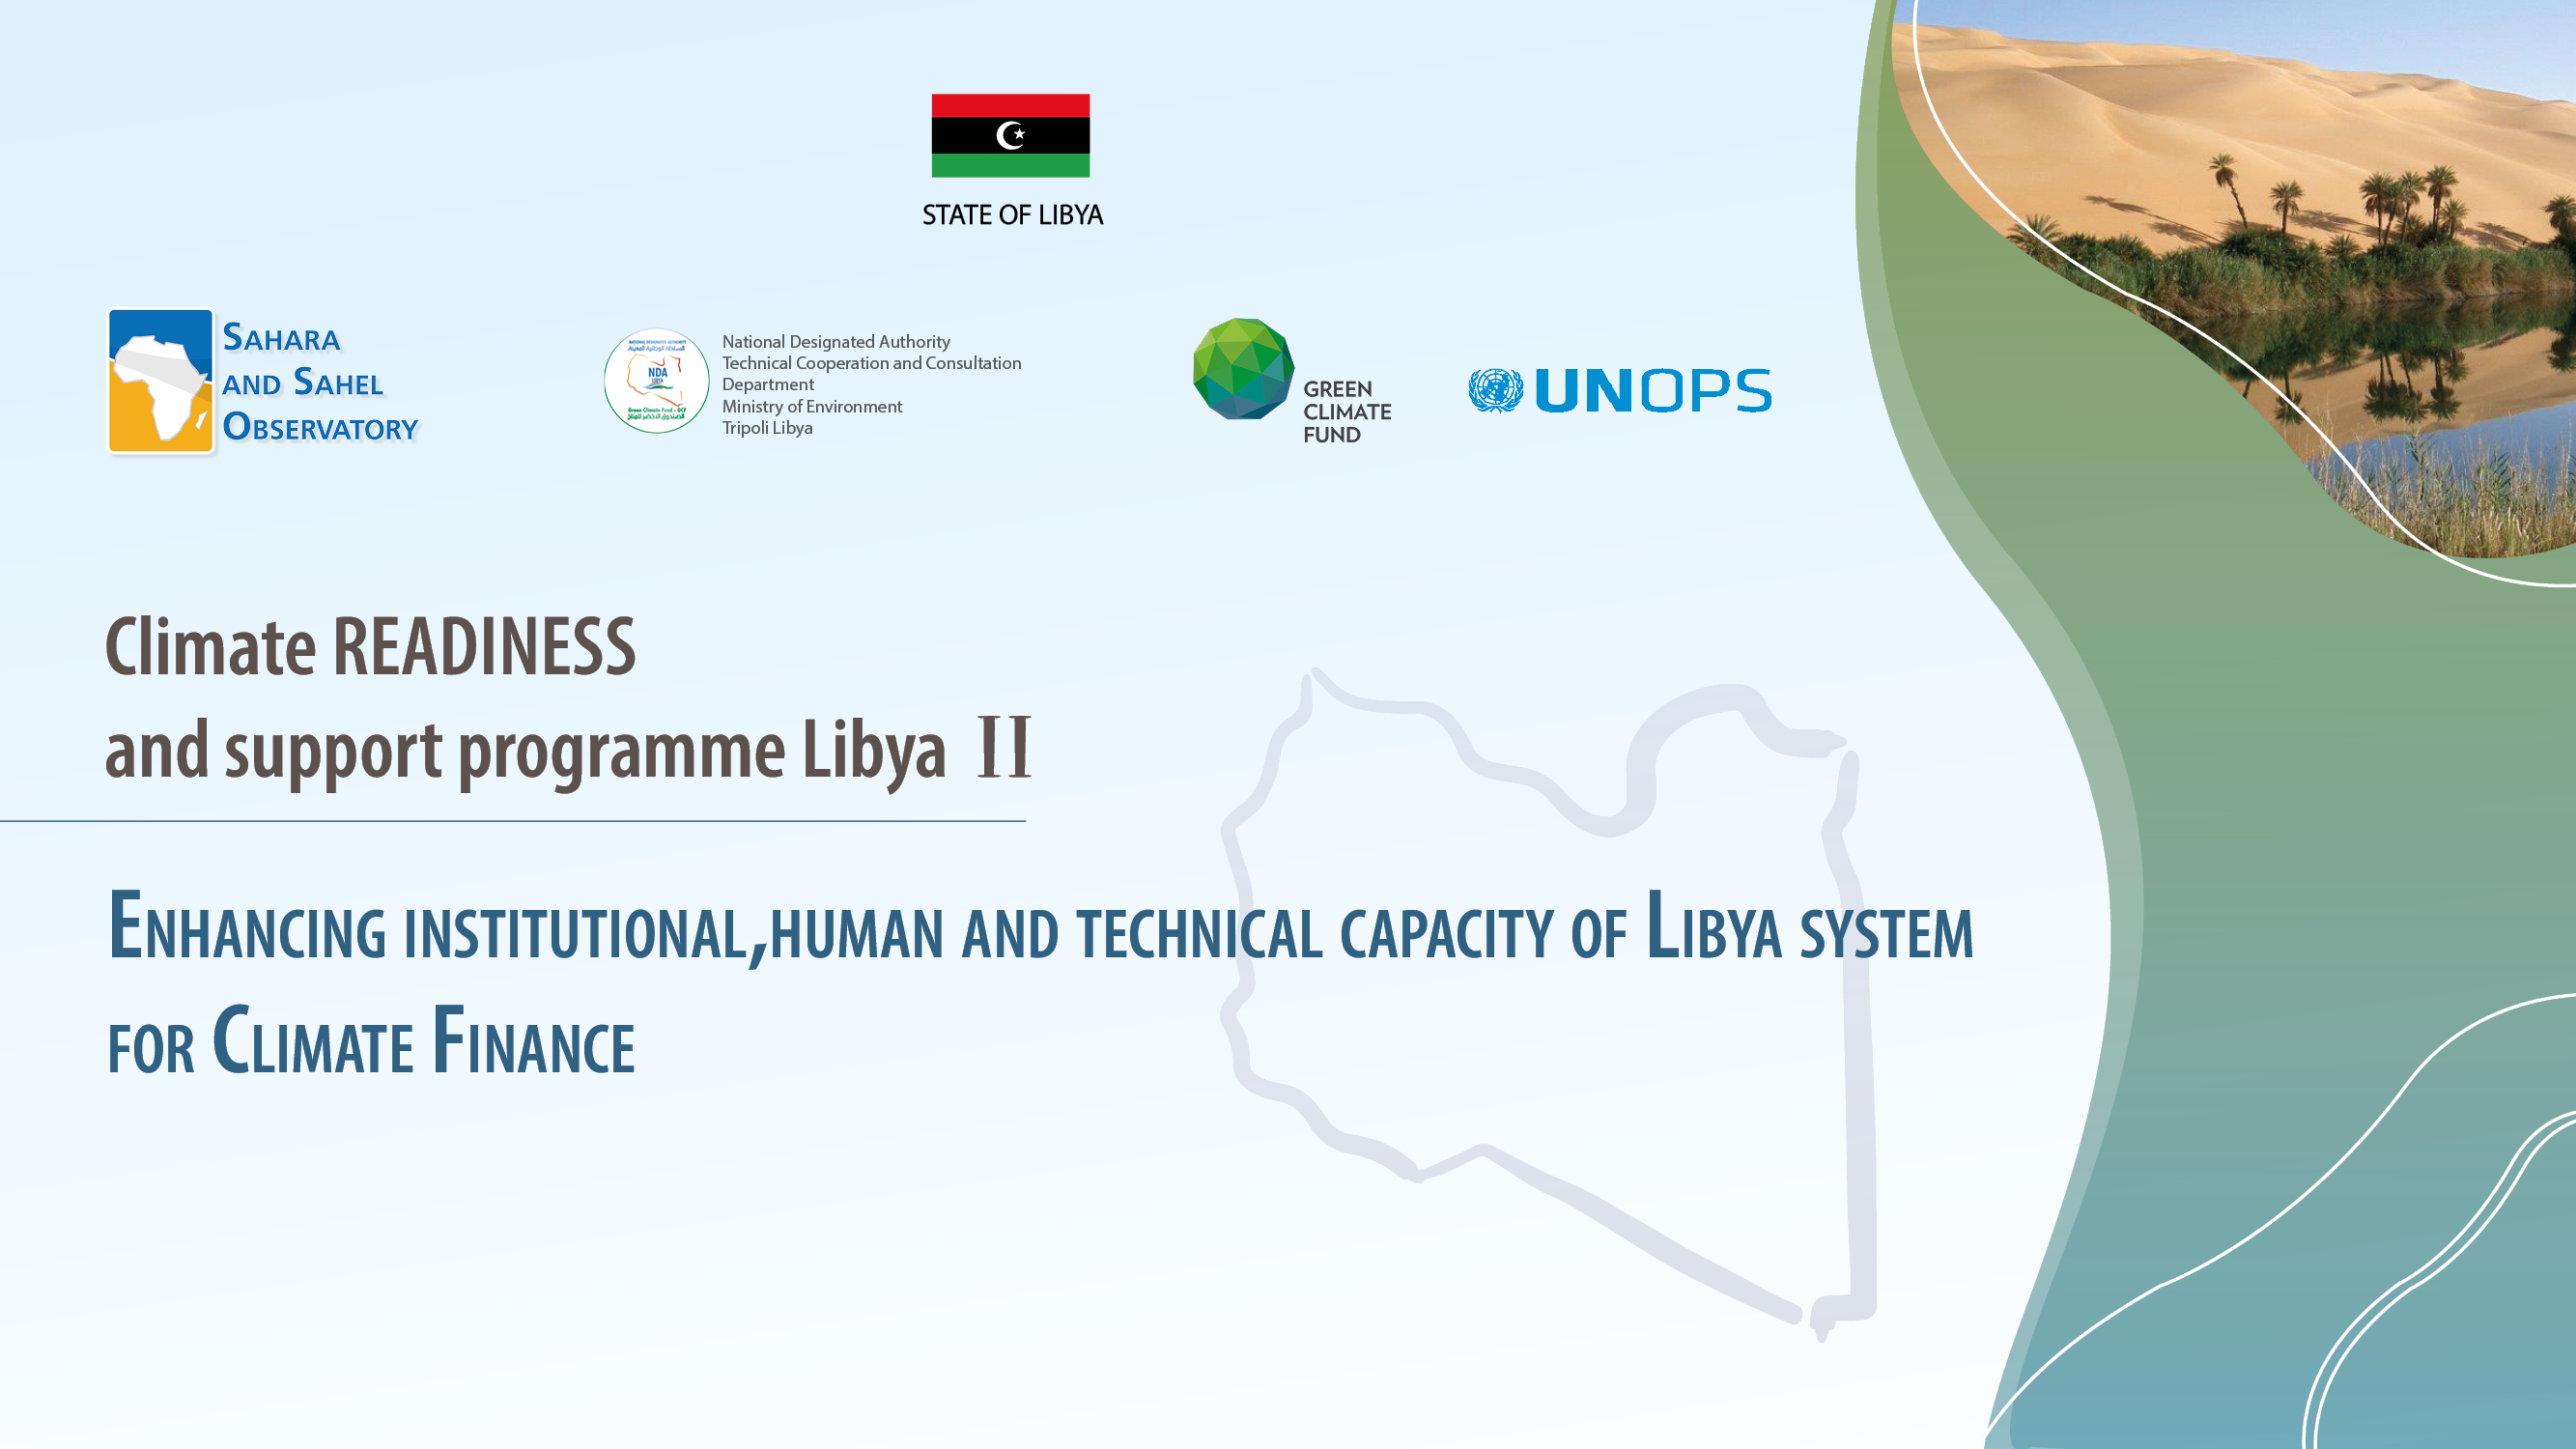  Readiness-Libya II | Training and capacity building workshop for the National Designated Authority (NDA) of Libya in the field of climate change and climate finance